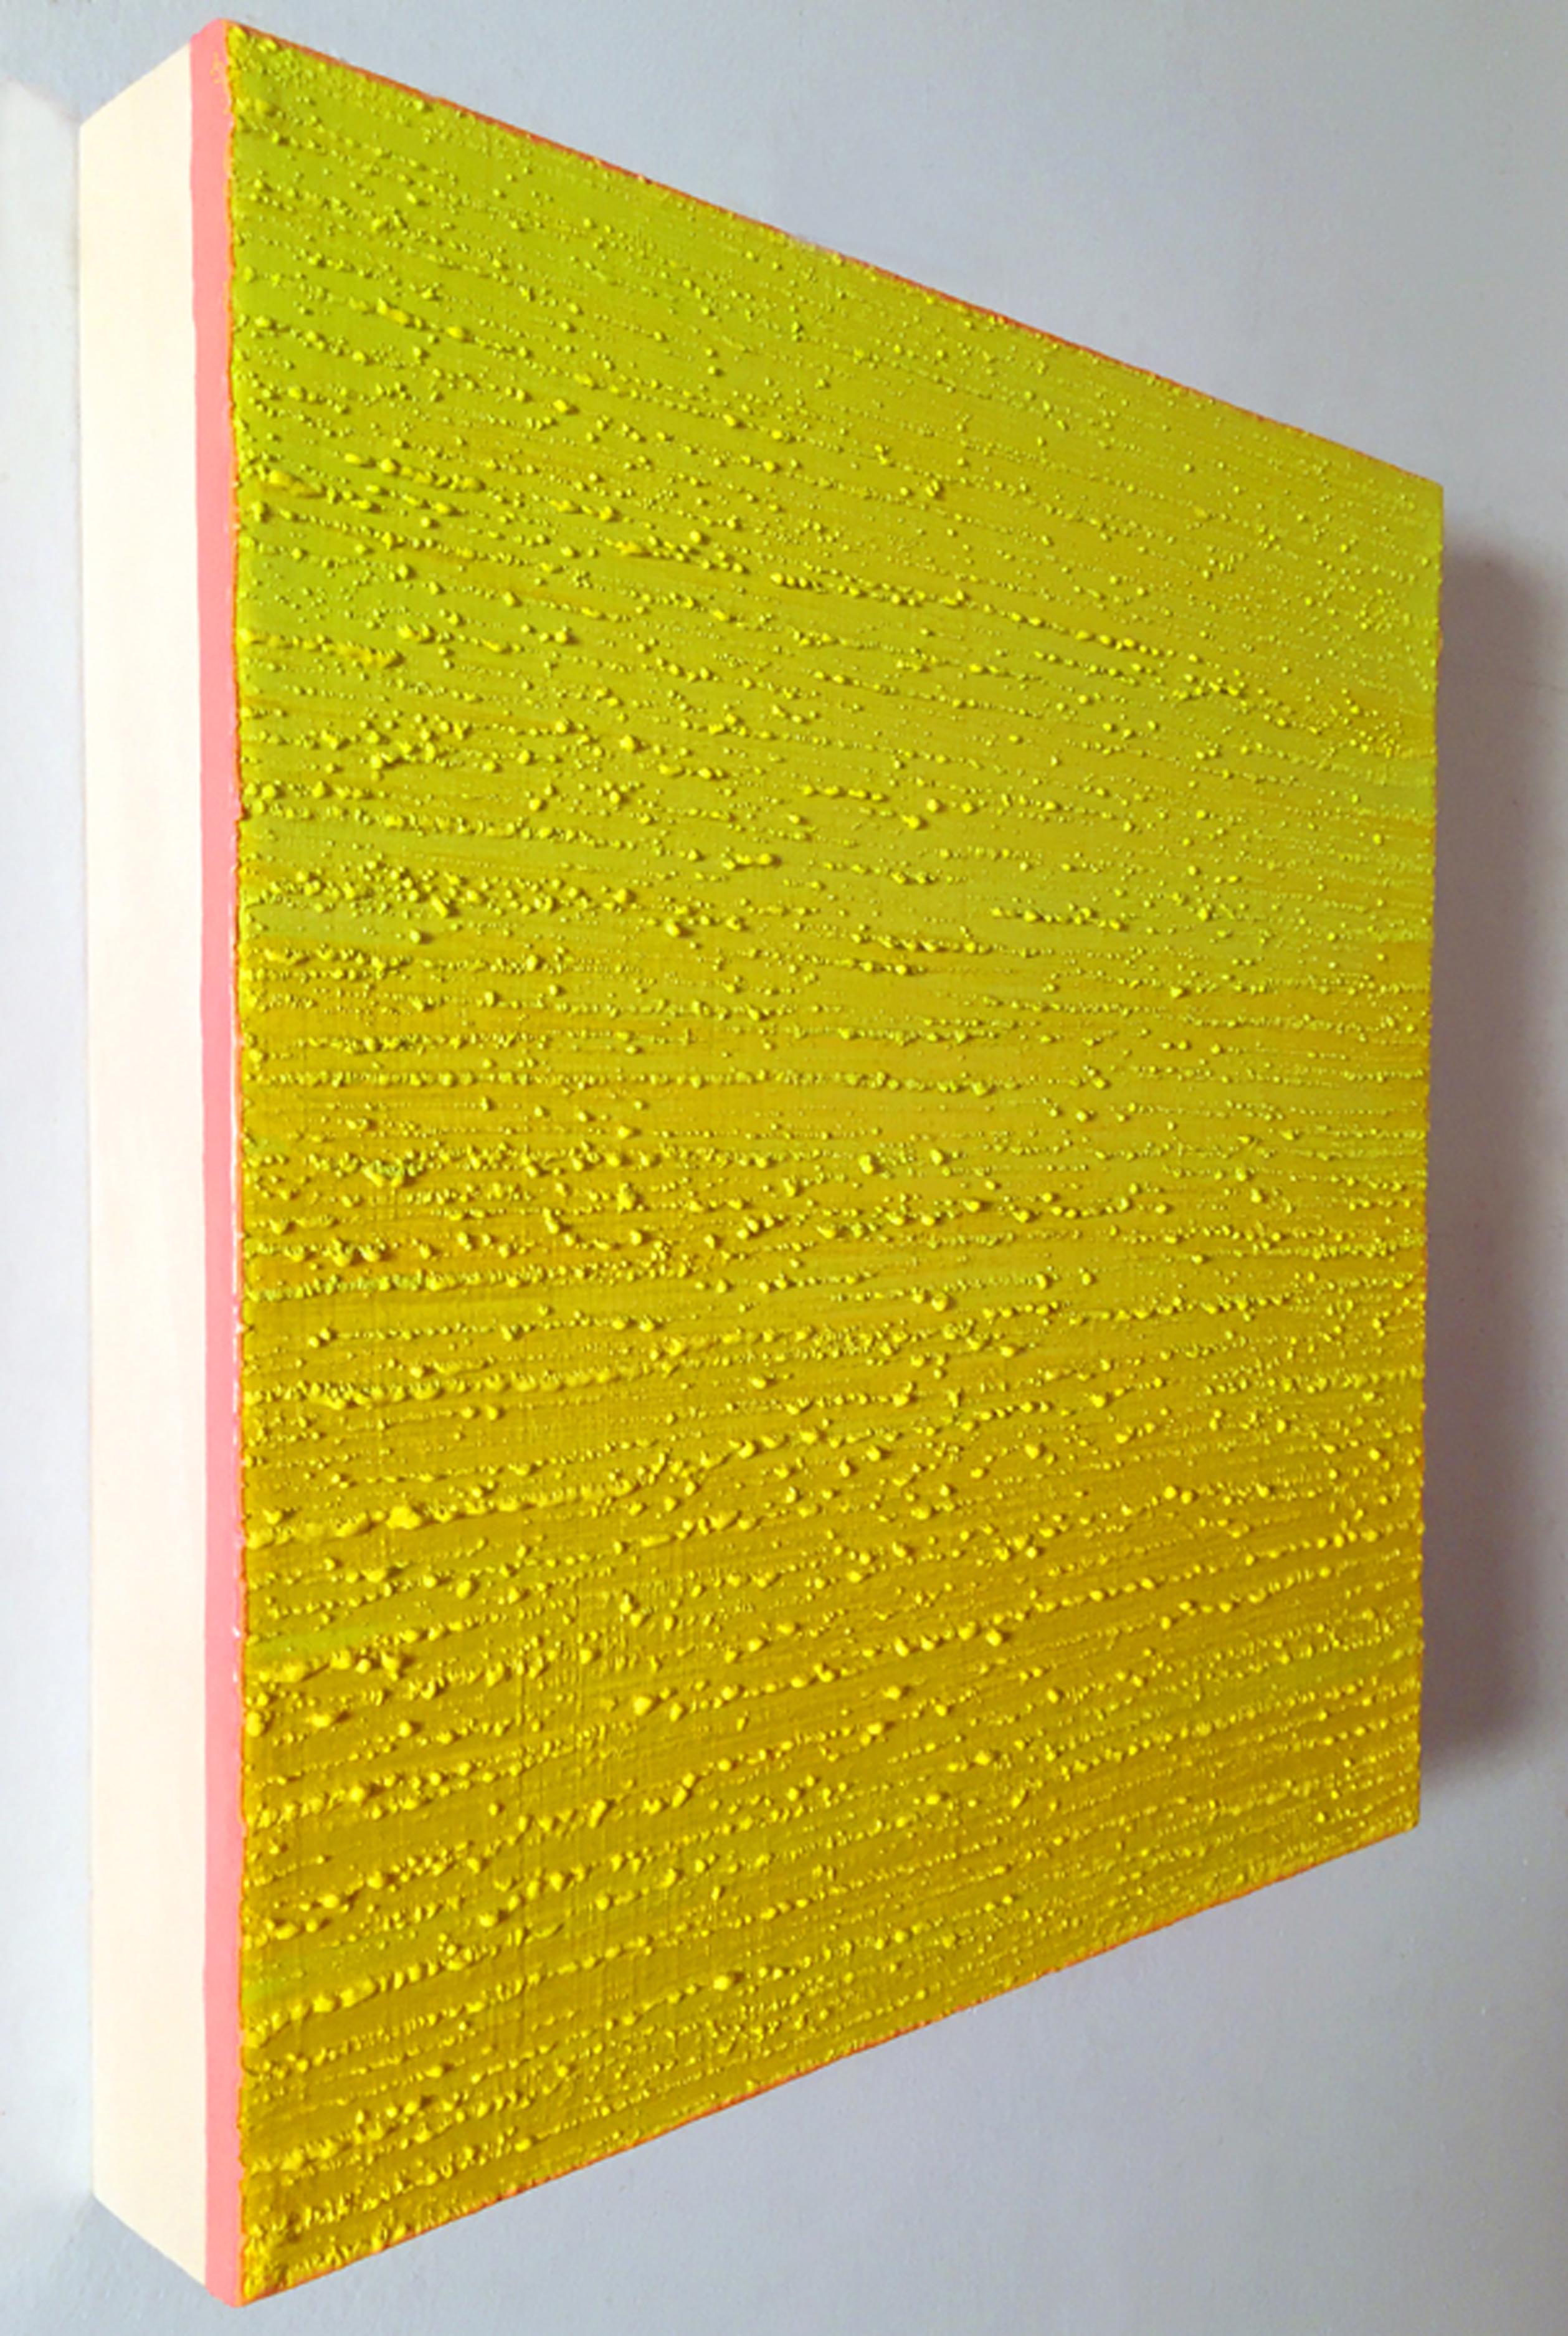 Silk Road 450, 2019, encaustic on panel, 12 x 12 x 2 inches For Sale 5